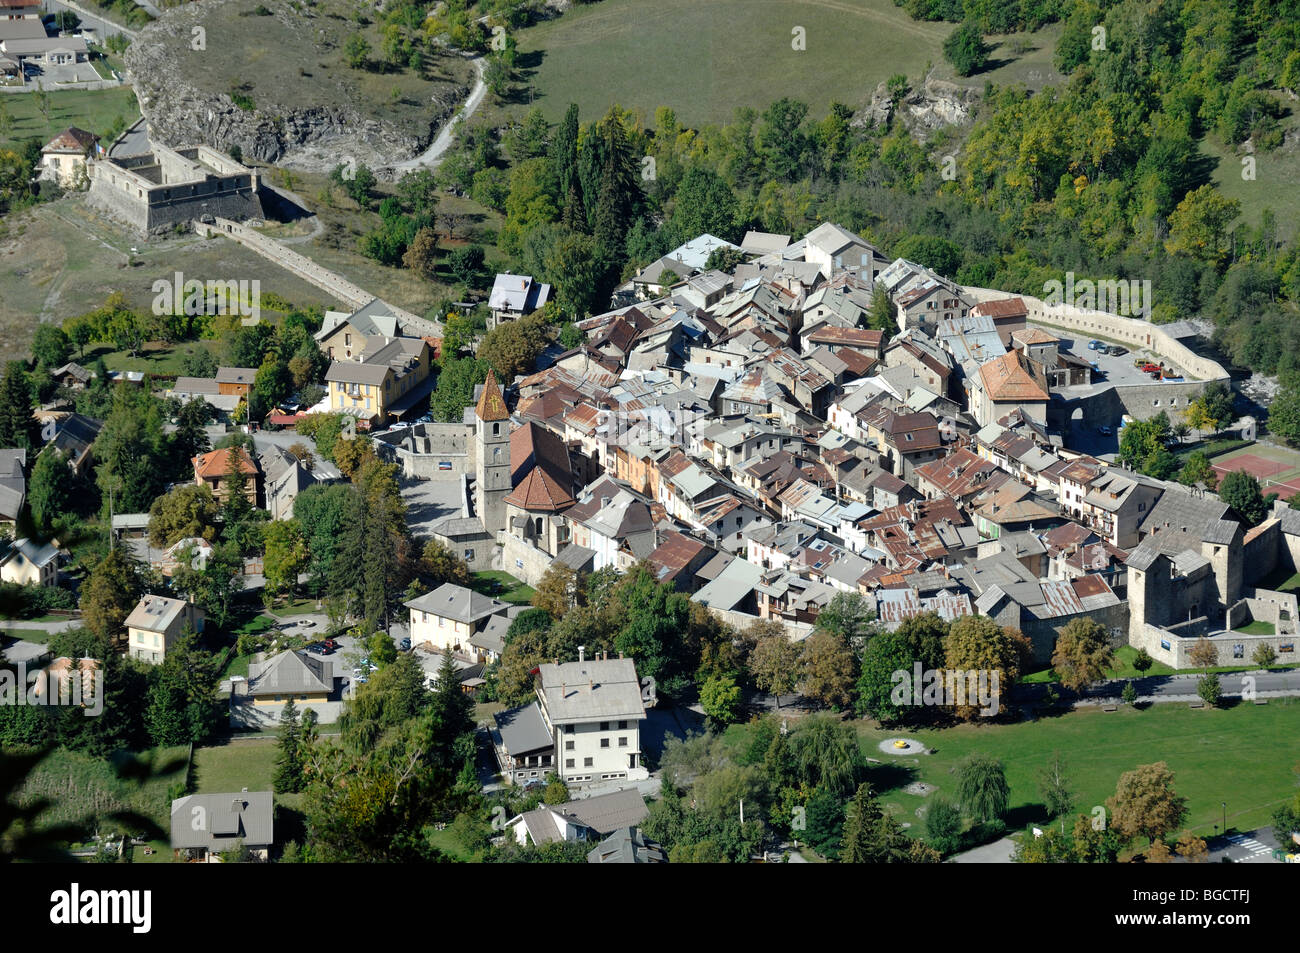 Aerial View of Old Town of Colmars or Colmars-les-Alpes, Walled Medieval Town Fortified by Vauban, & Fort de France, Alpes-de-Haute-Provence Stock Photo